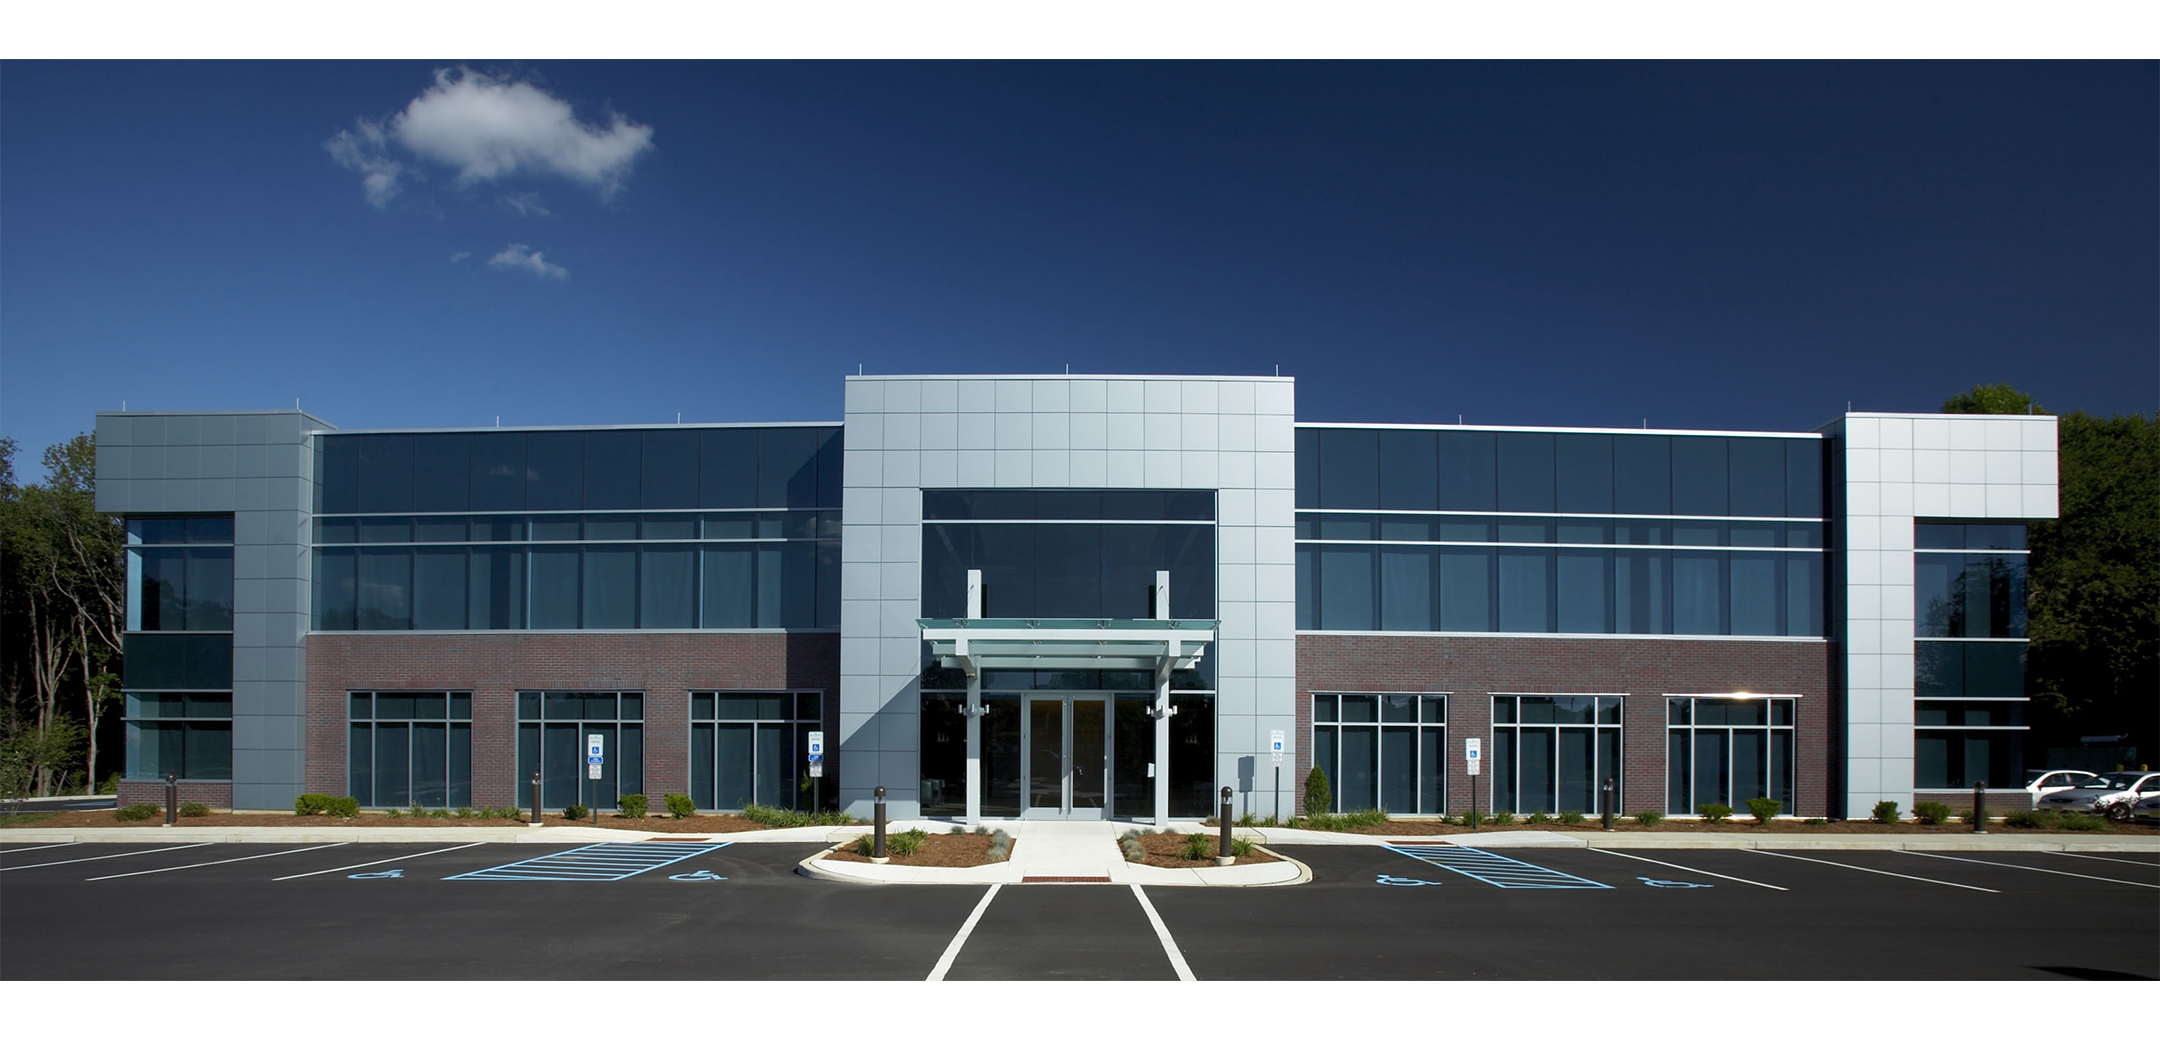 The front view of a 2-story South Jersey Federal Credit Union building with multiple shades of gray precast panels and shaded glass windows featuring the front entrance and parking lot.